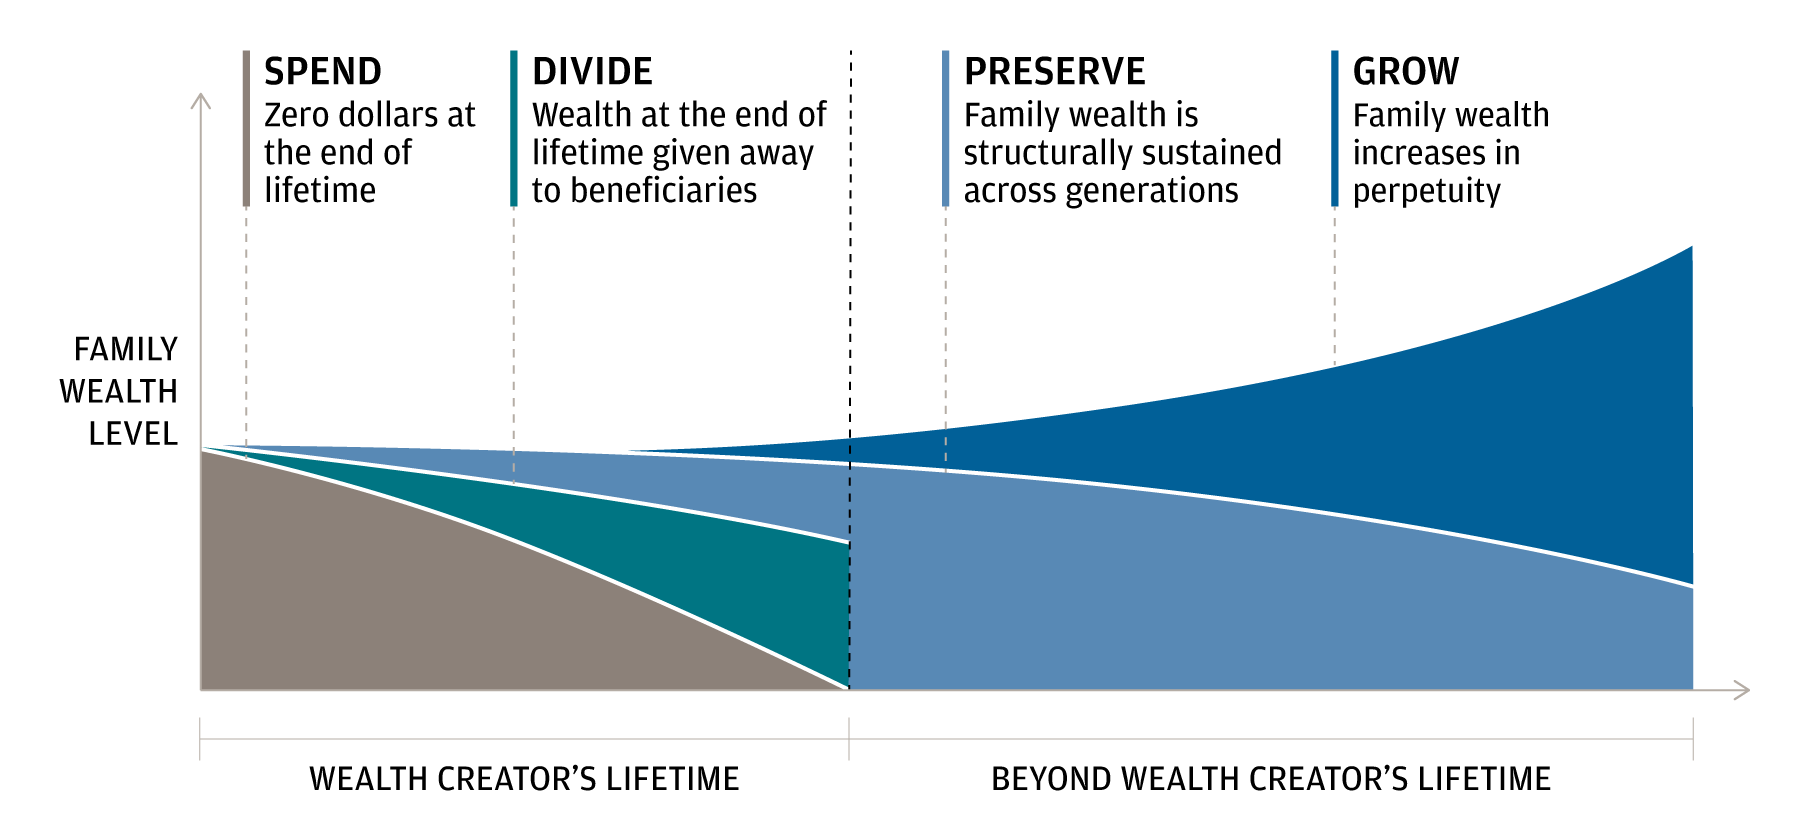 The graphic shows how the four foundational intents for wealth evolve during and beyond a wealth creator’s lifetime.